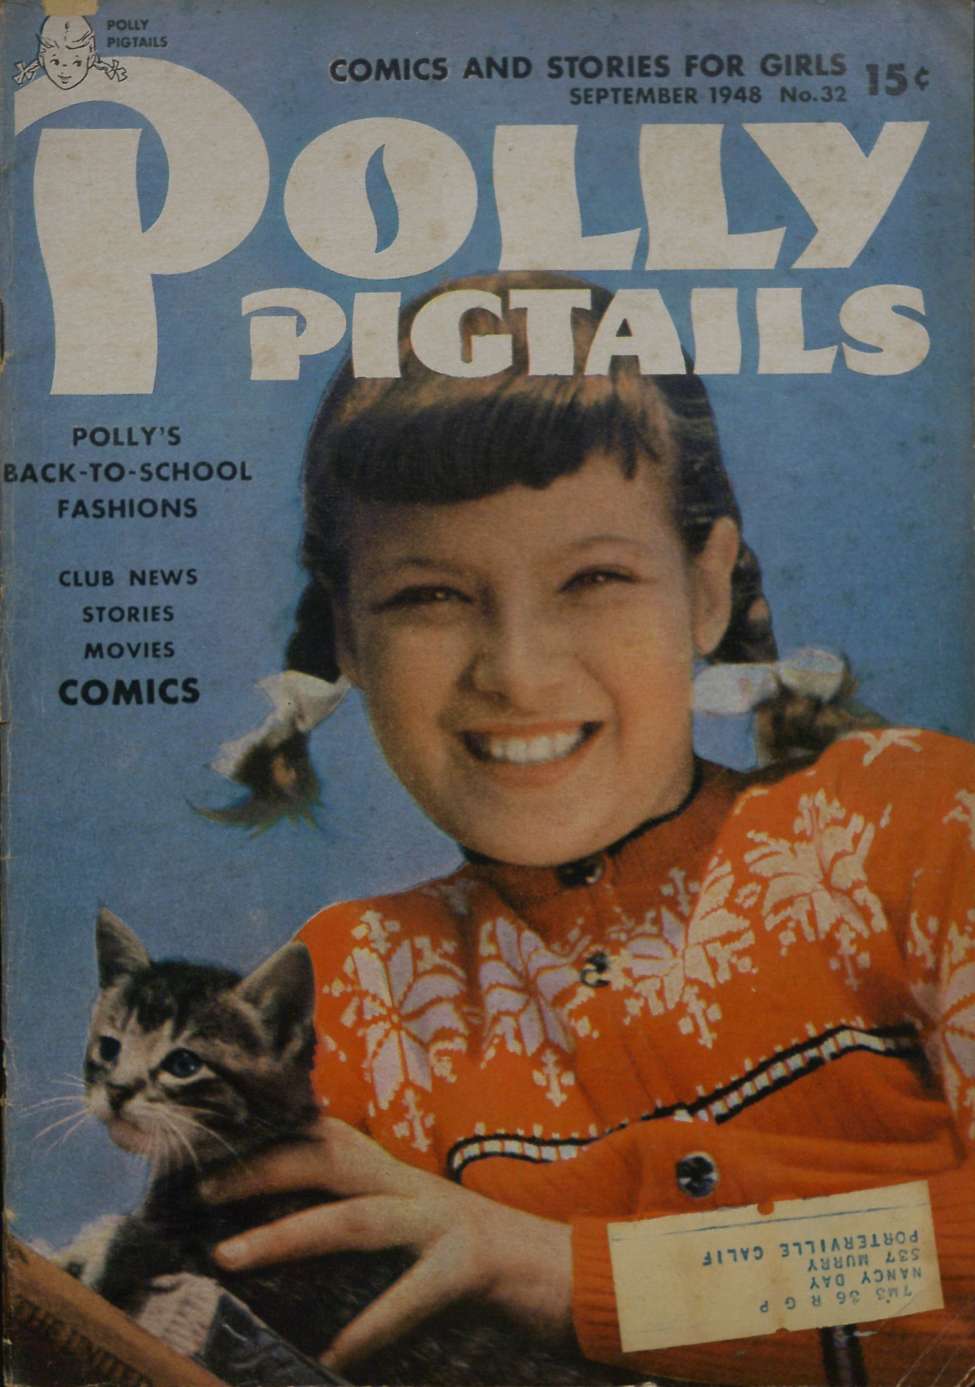 Comic Book Cover For Polly Pigtails 32